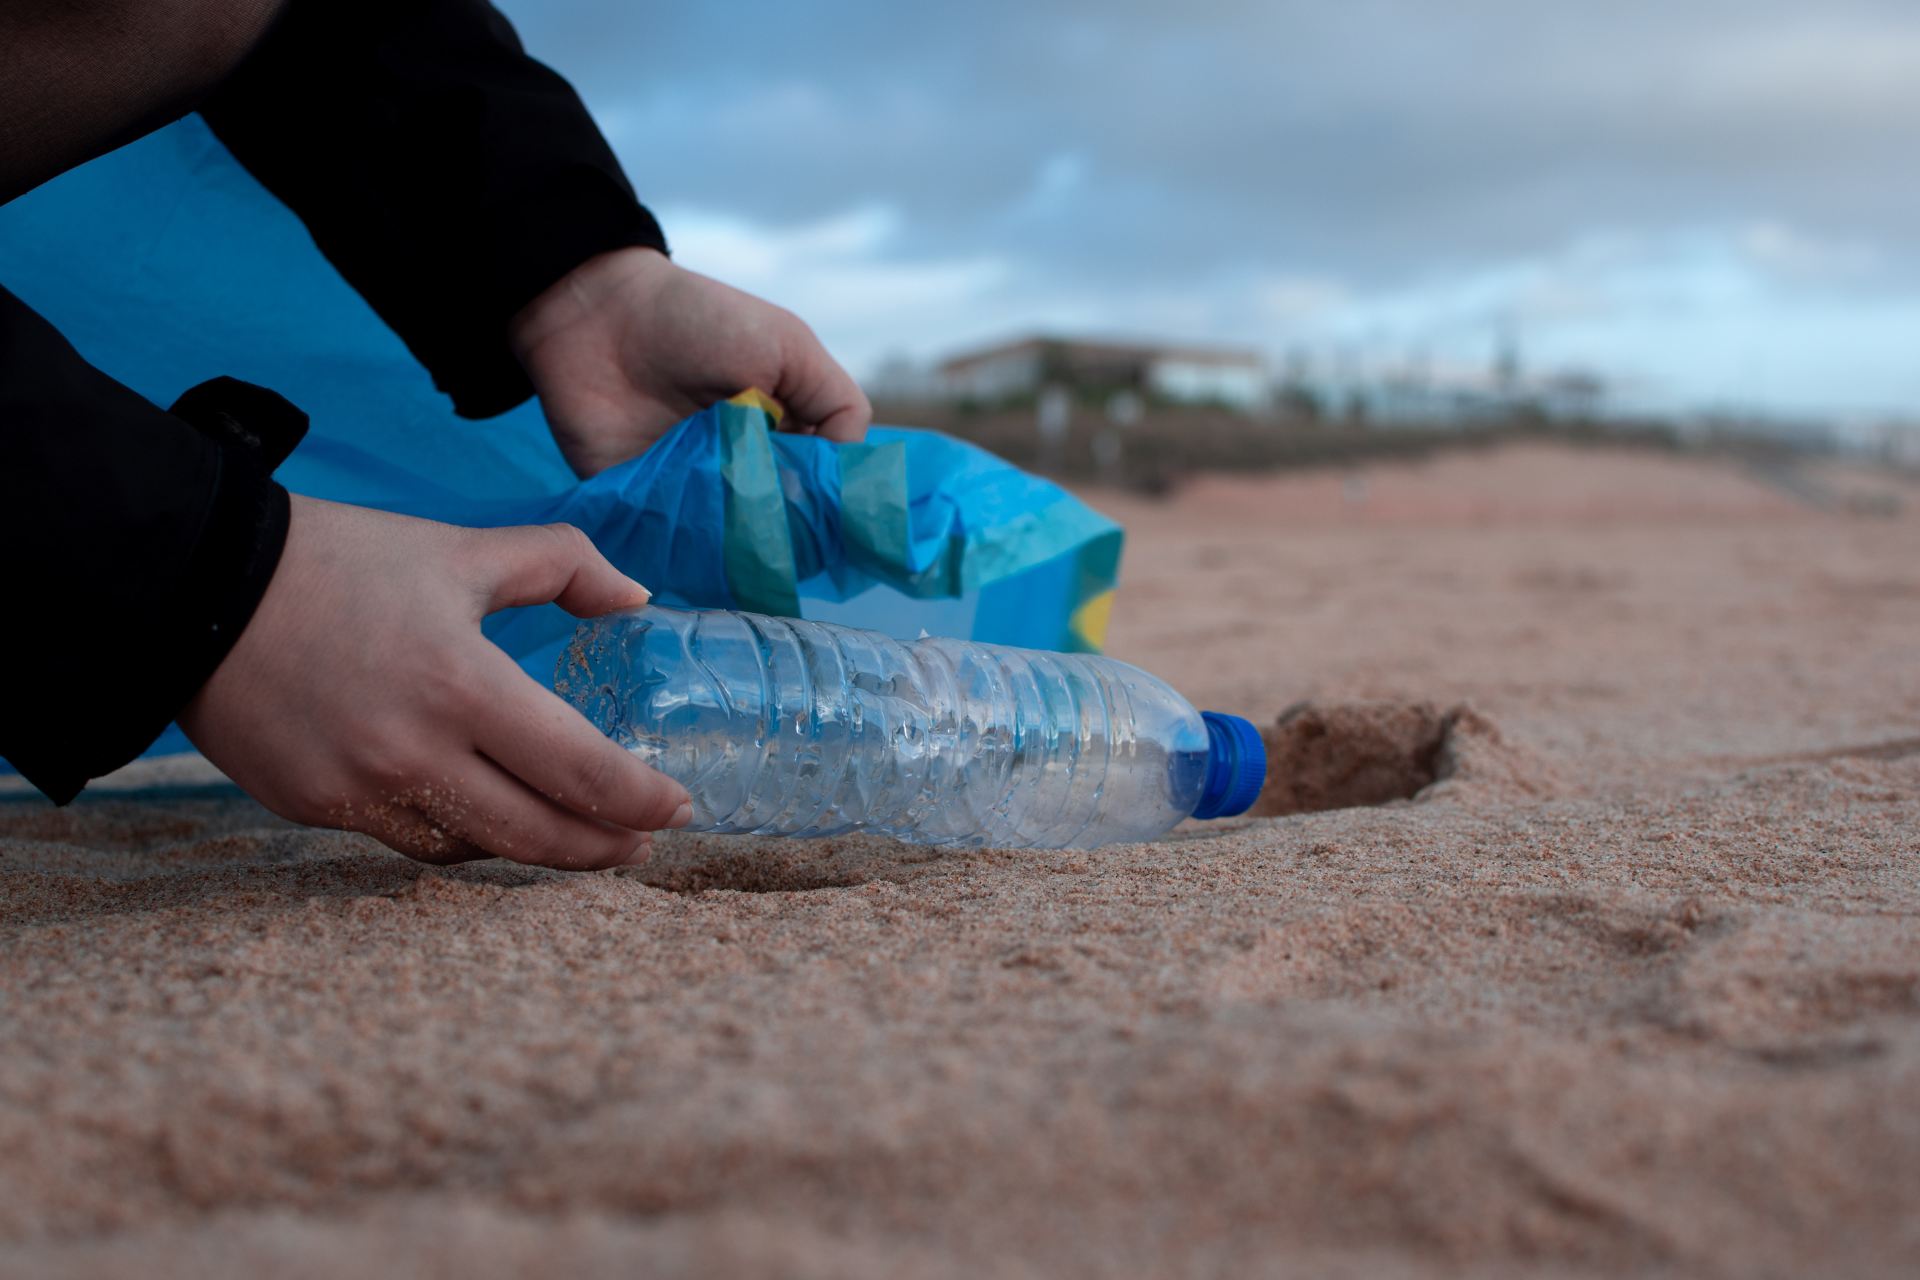 Picking up a plastic bottle from the beach